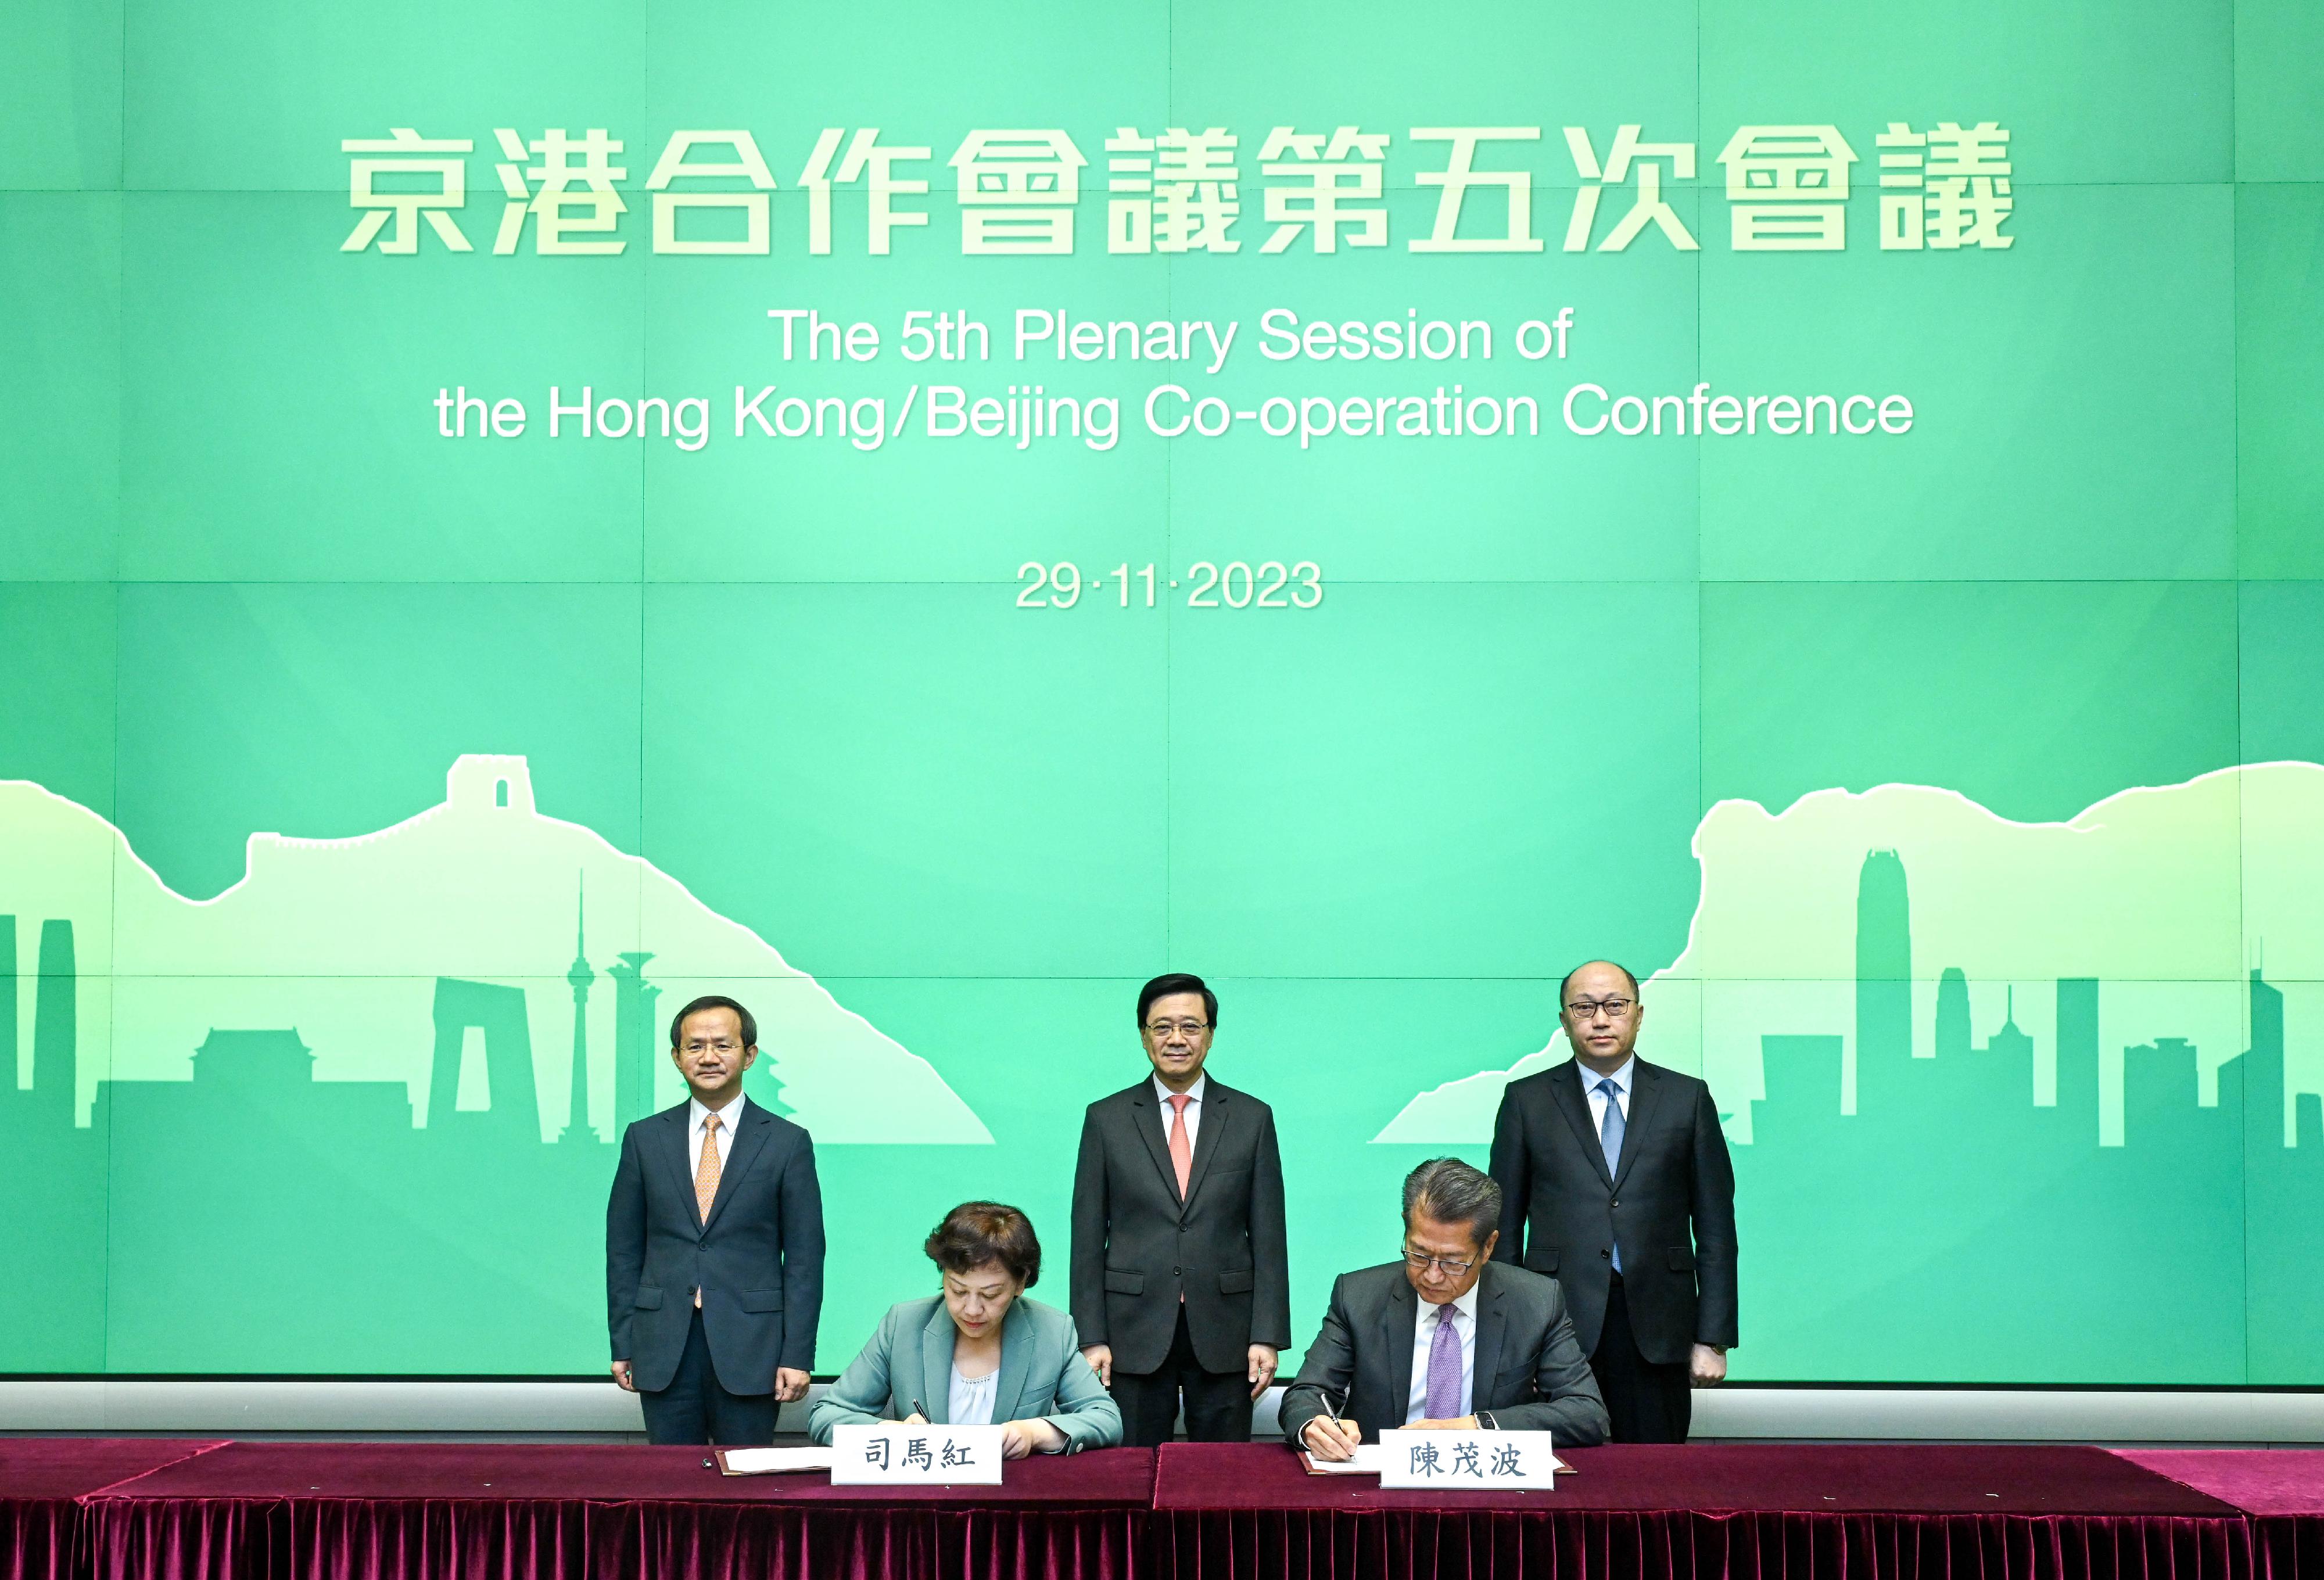 The Chief Executive, Mr John Lee, and the Mayor of Beijing, Mr Yin Yong, leading the delegations of the governments of Hong Kong Special Administrative Region (HKSAR) and Beijing respectively, held the Fifth Plenary Session of the Hong Kong/Beijing Co-operation Conference in Hong Kong today (November 29). Photo shows Mr Lee (back row, centre), Mr Yin (back row, left), Deputy Director of the Hong Kong and Macao Affairs Office of the State Council, Director of the Liaison Office of the Central People's Government in the HKSAR, Mr Zheng Yanxiong (back row, right), witnessing the signing of the Co-operation Memorandum of the Fifth Plenary Session Hong Kong/Beijing Co-operation Conferenc" by the Financial Secretary, Mr Paul Chan (front row, right), and Vice Mayor of Beijing Municipal People's Government Ms Sima Hong (front row, left).

